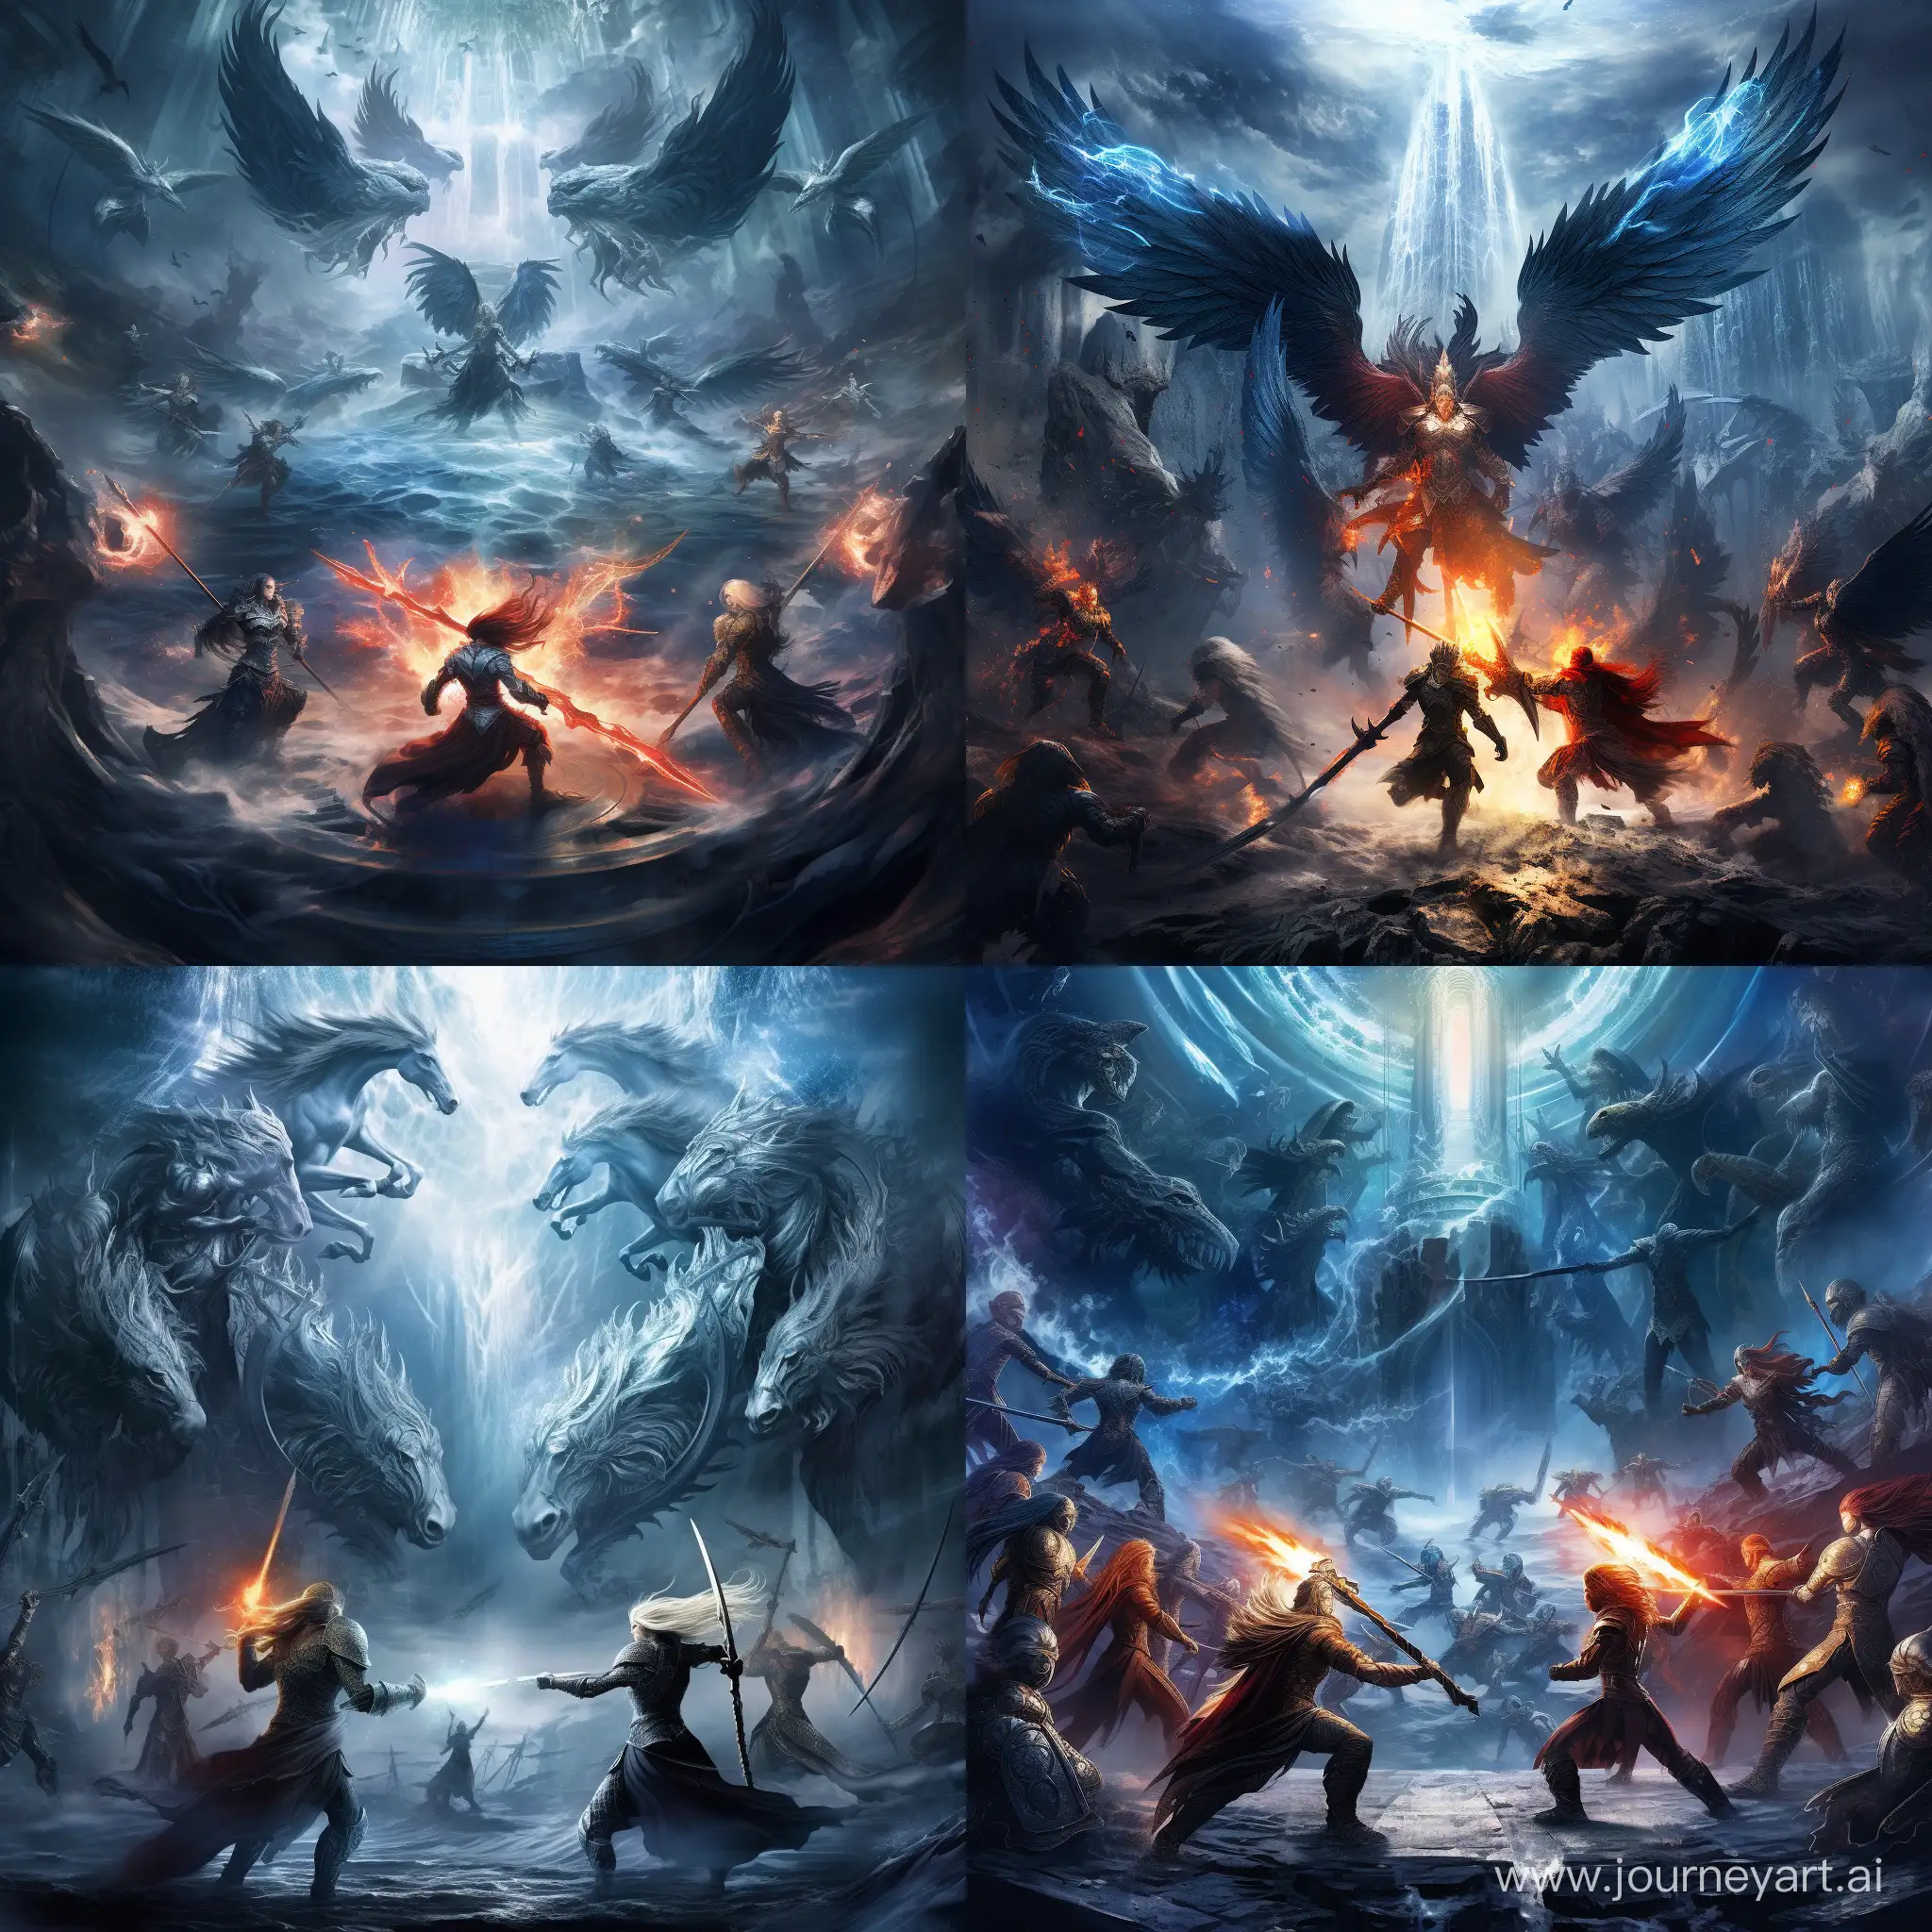 Epic-Battle-of-Valkyries-and-Thor-Against-Ice-Giants-in-Valhalla